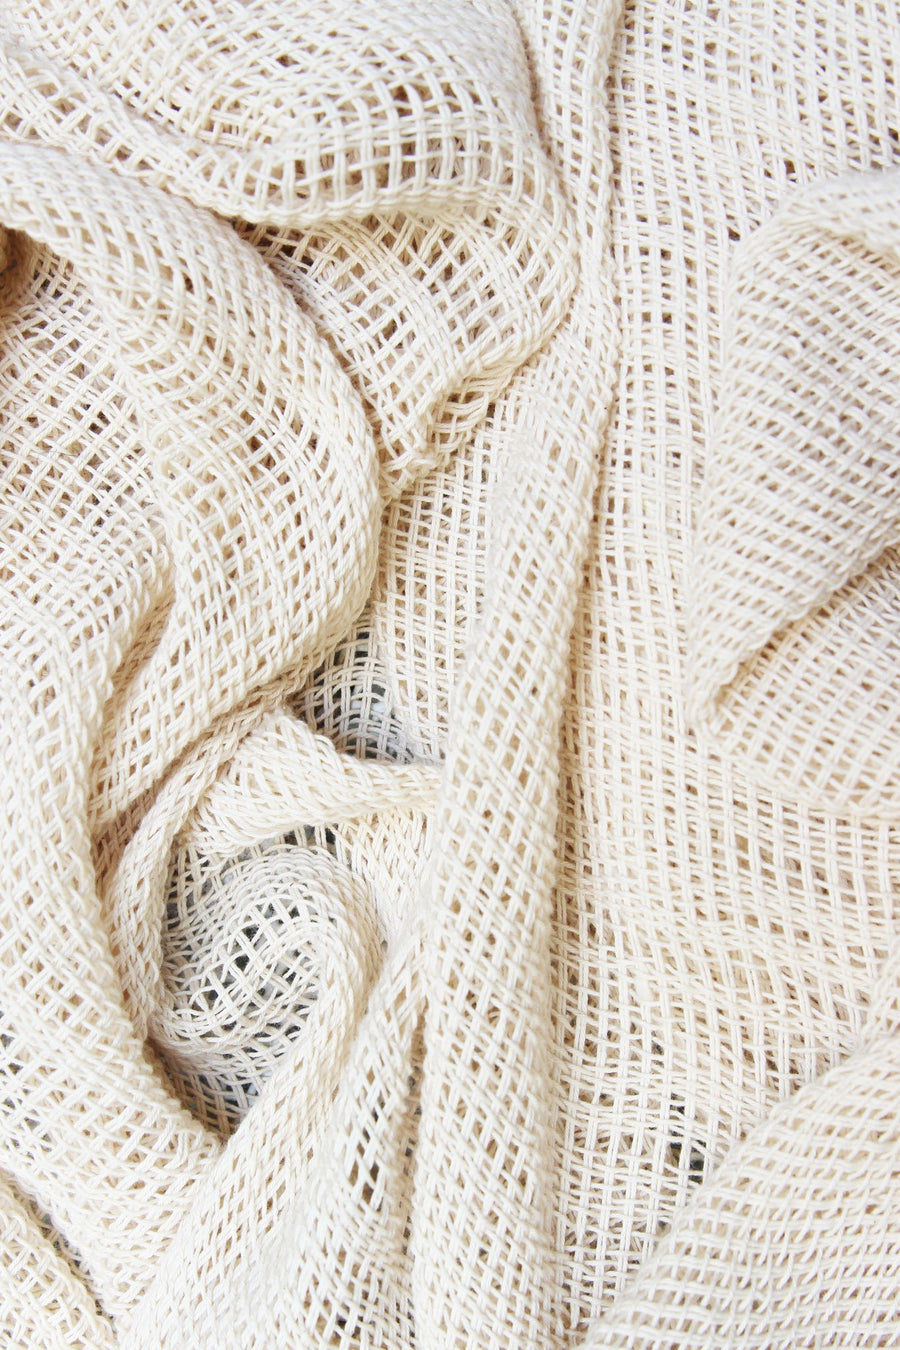 This is a detail photo of the texture of a handmade knit natural-colored shawl.